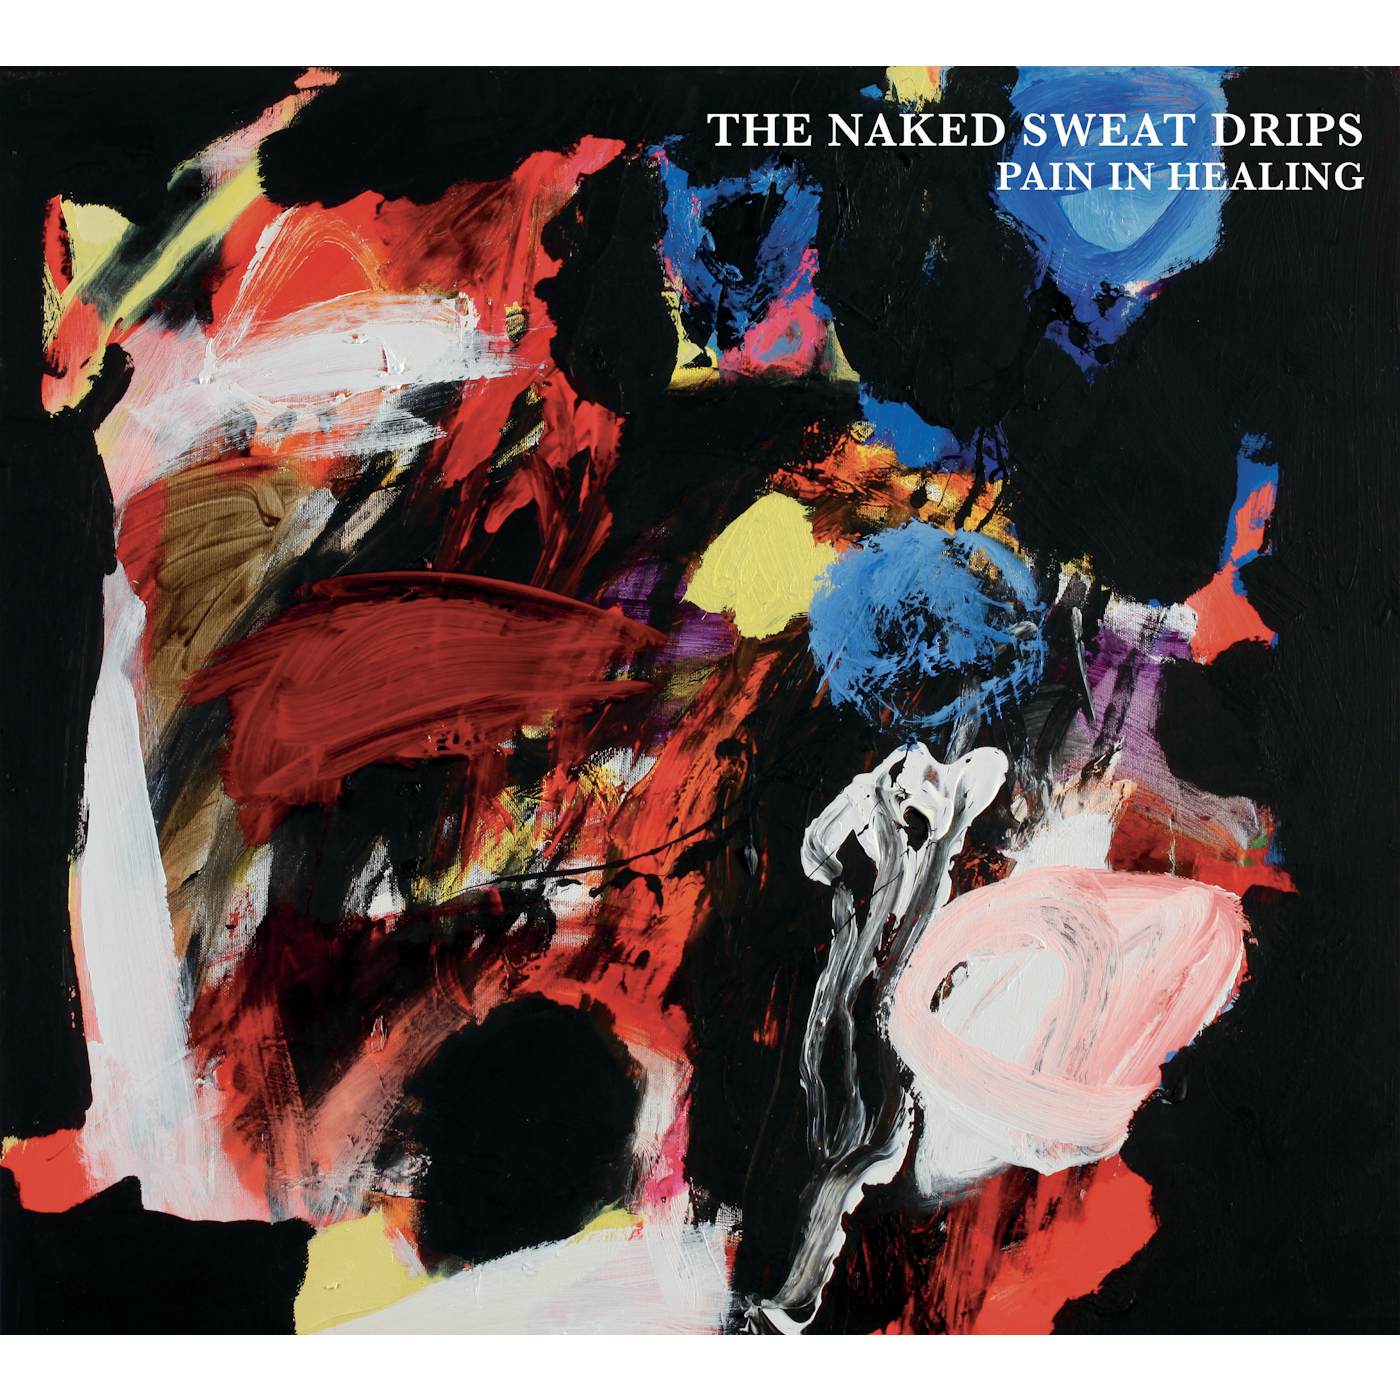 The Naked Sweat Drips PAIN IN HEALING CD